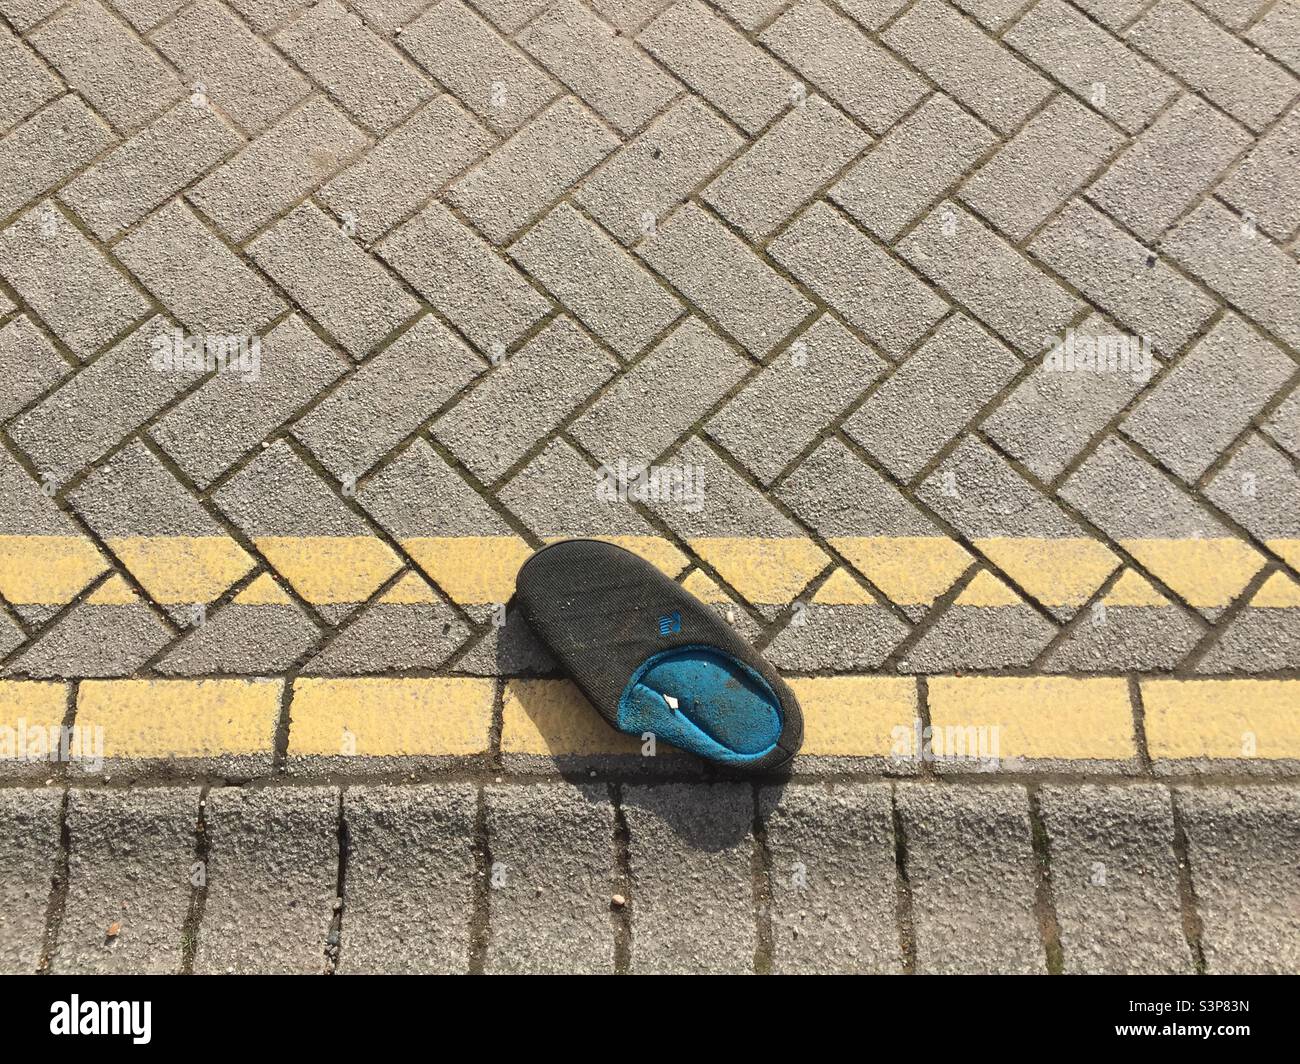 Discarded slipper on double yellow line Stock Photo